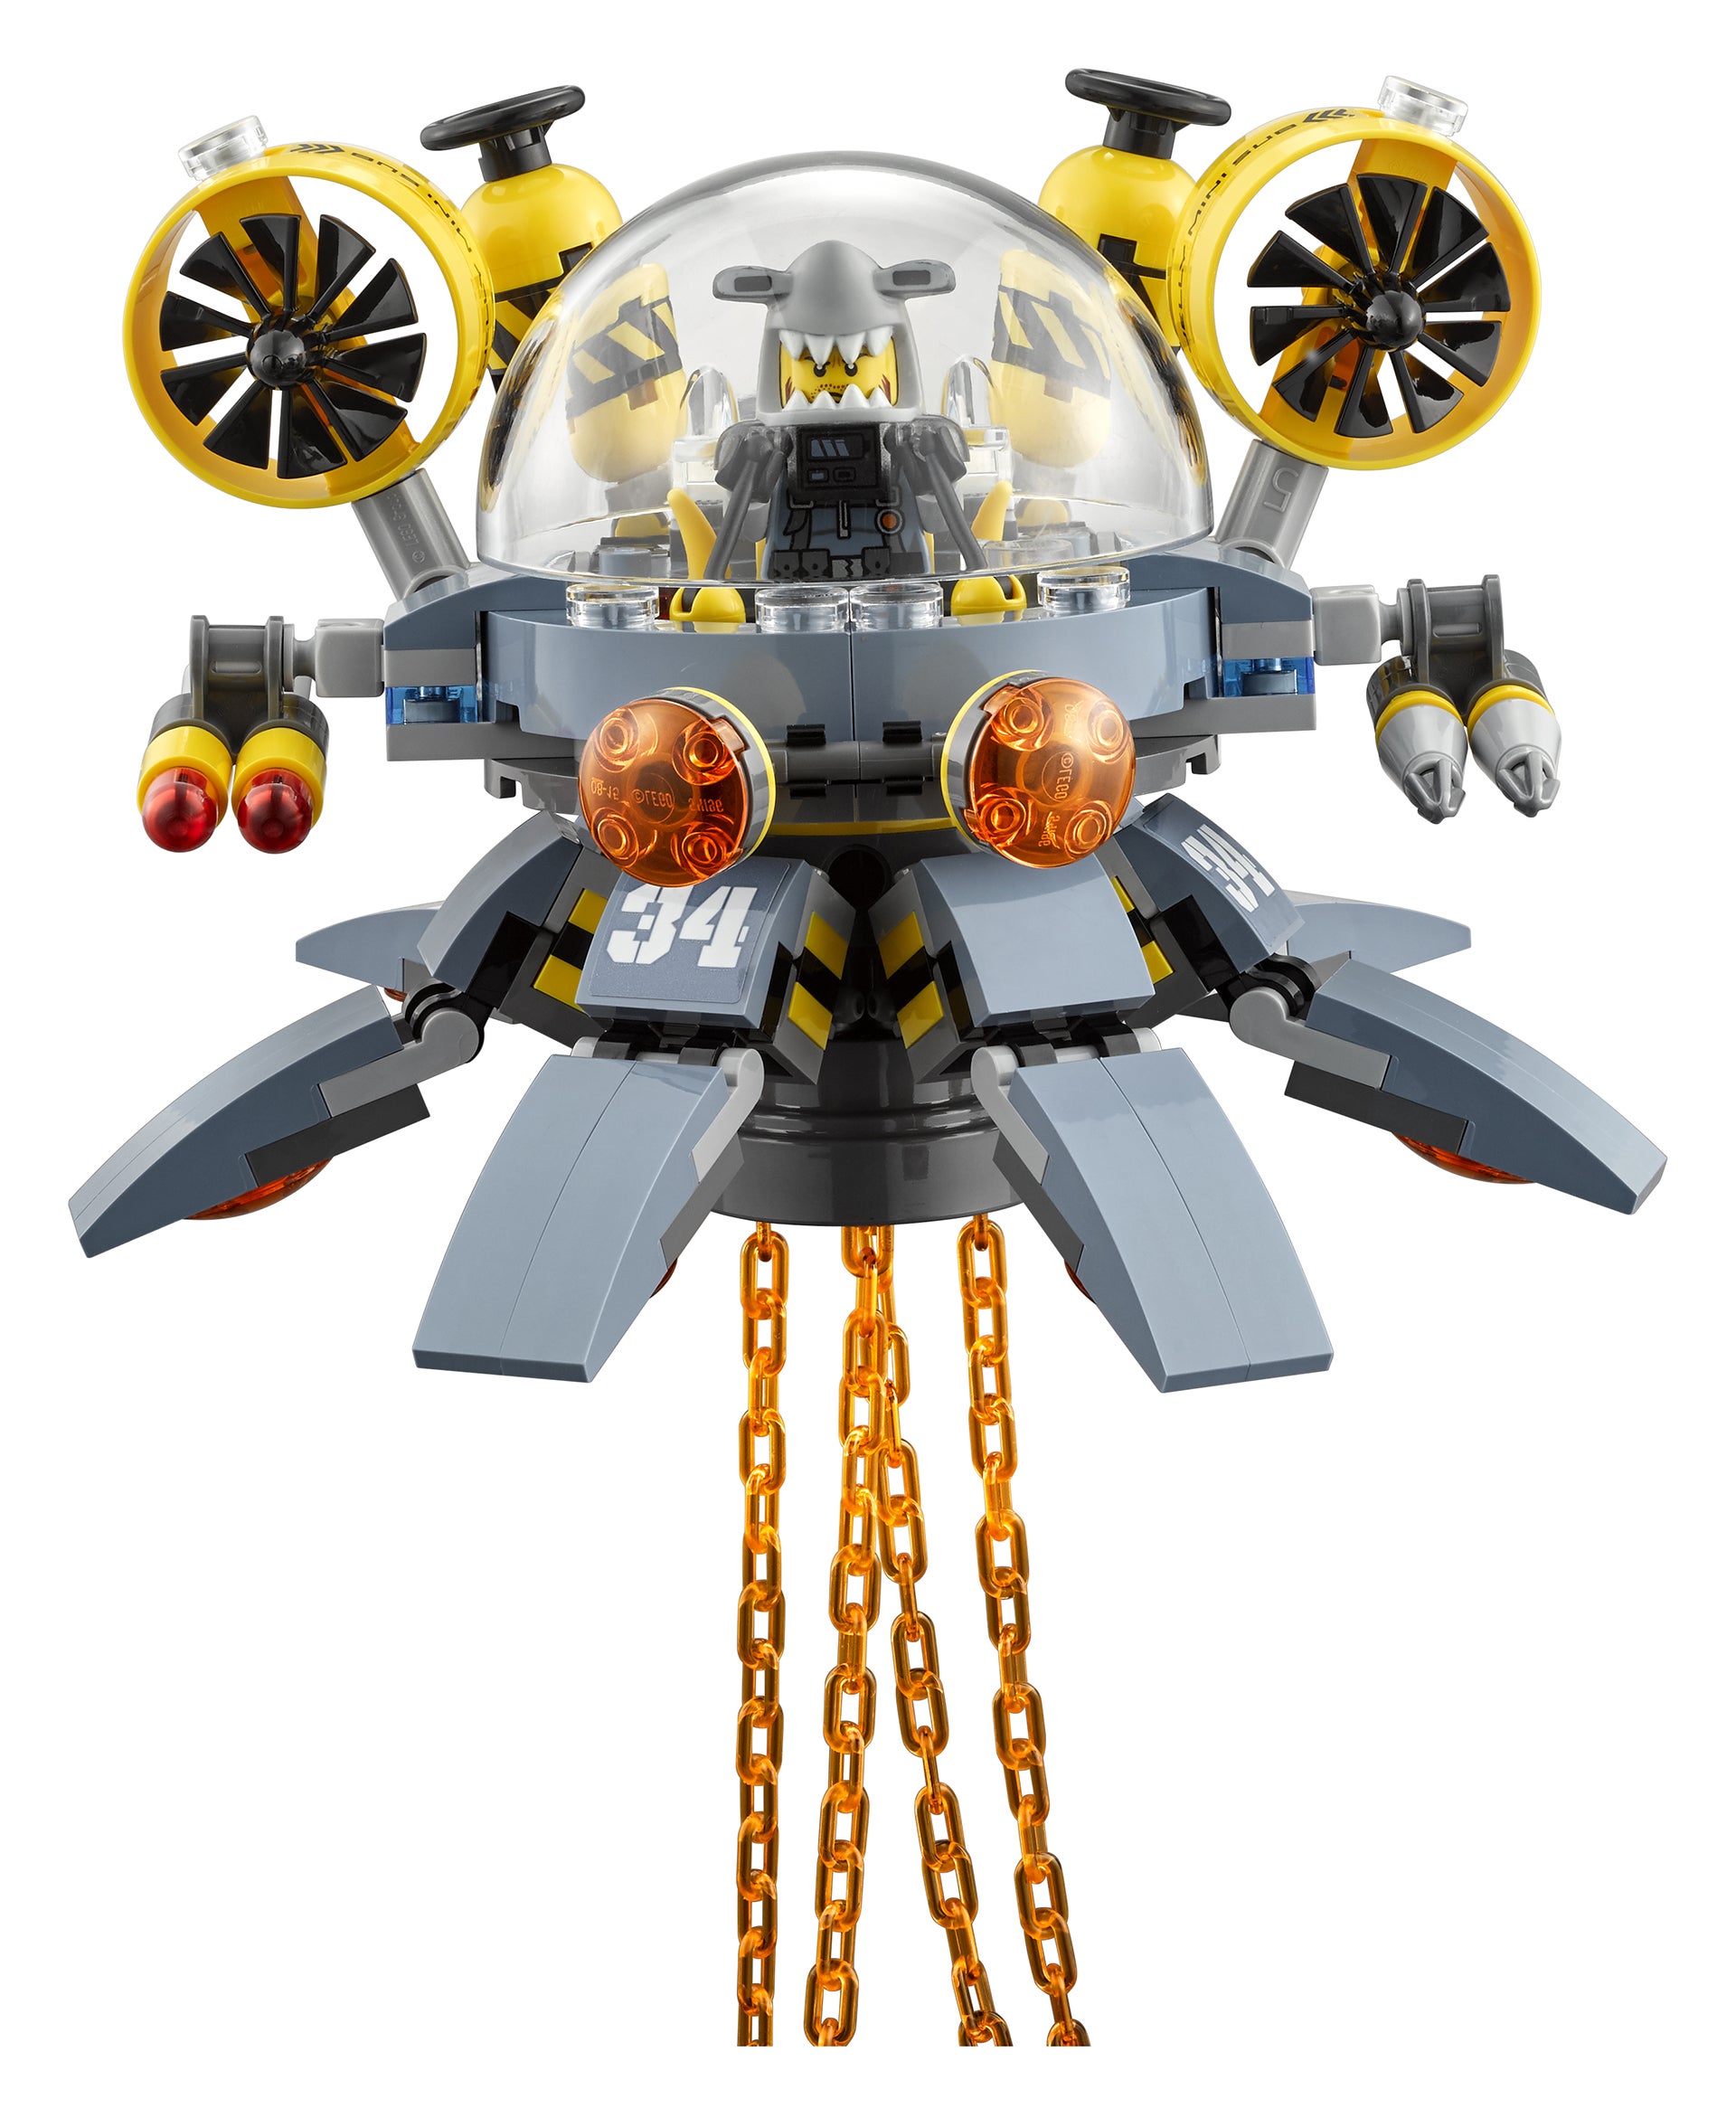 The Ninjago Movie Is Spawning Some Very Cool Lego Sets